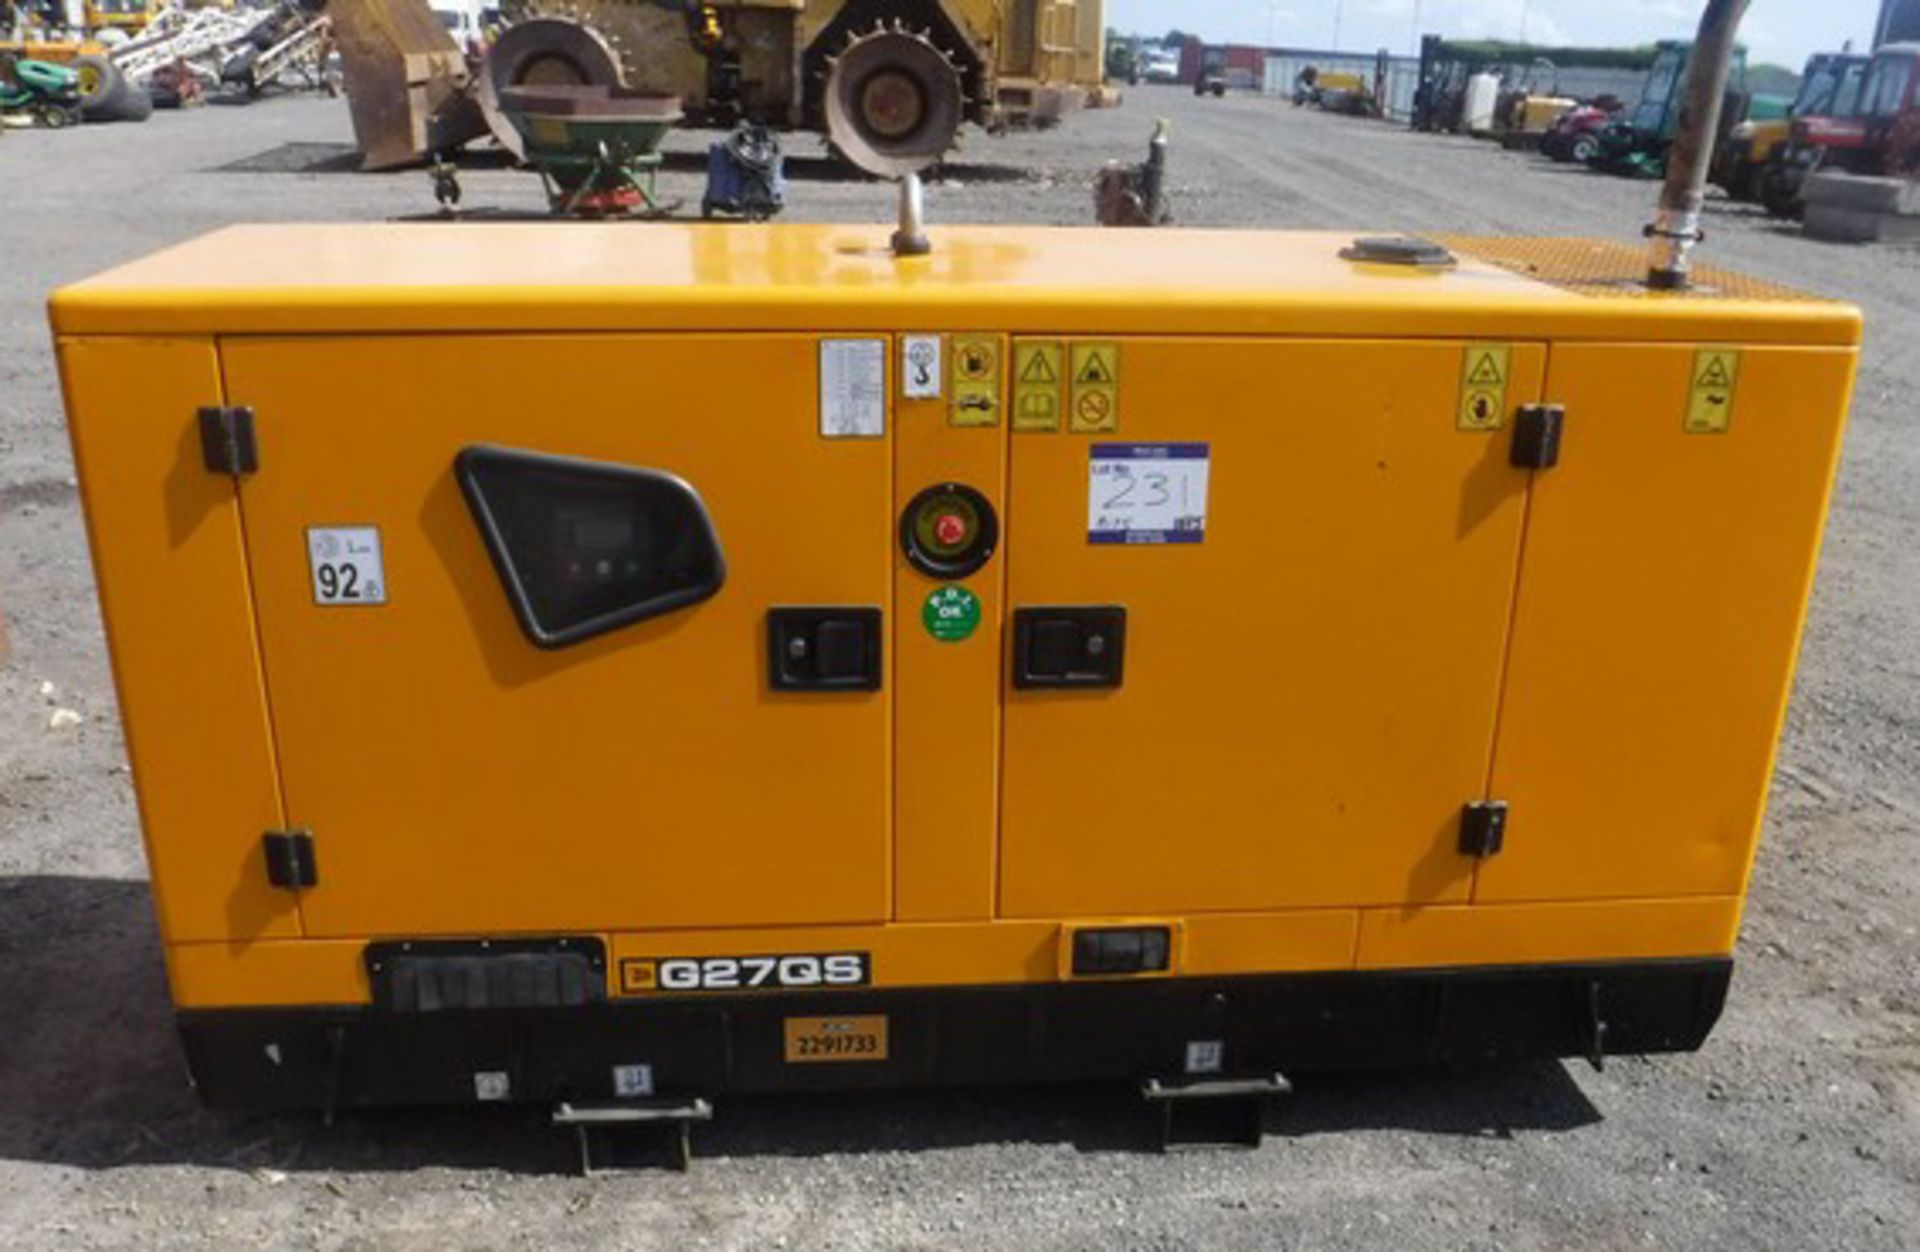 2017 JCB G27QS generator 24.5KVA rate power engine no 4701300610 1081hrs (not verified) - Image 4 of 11